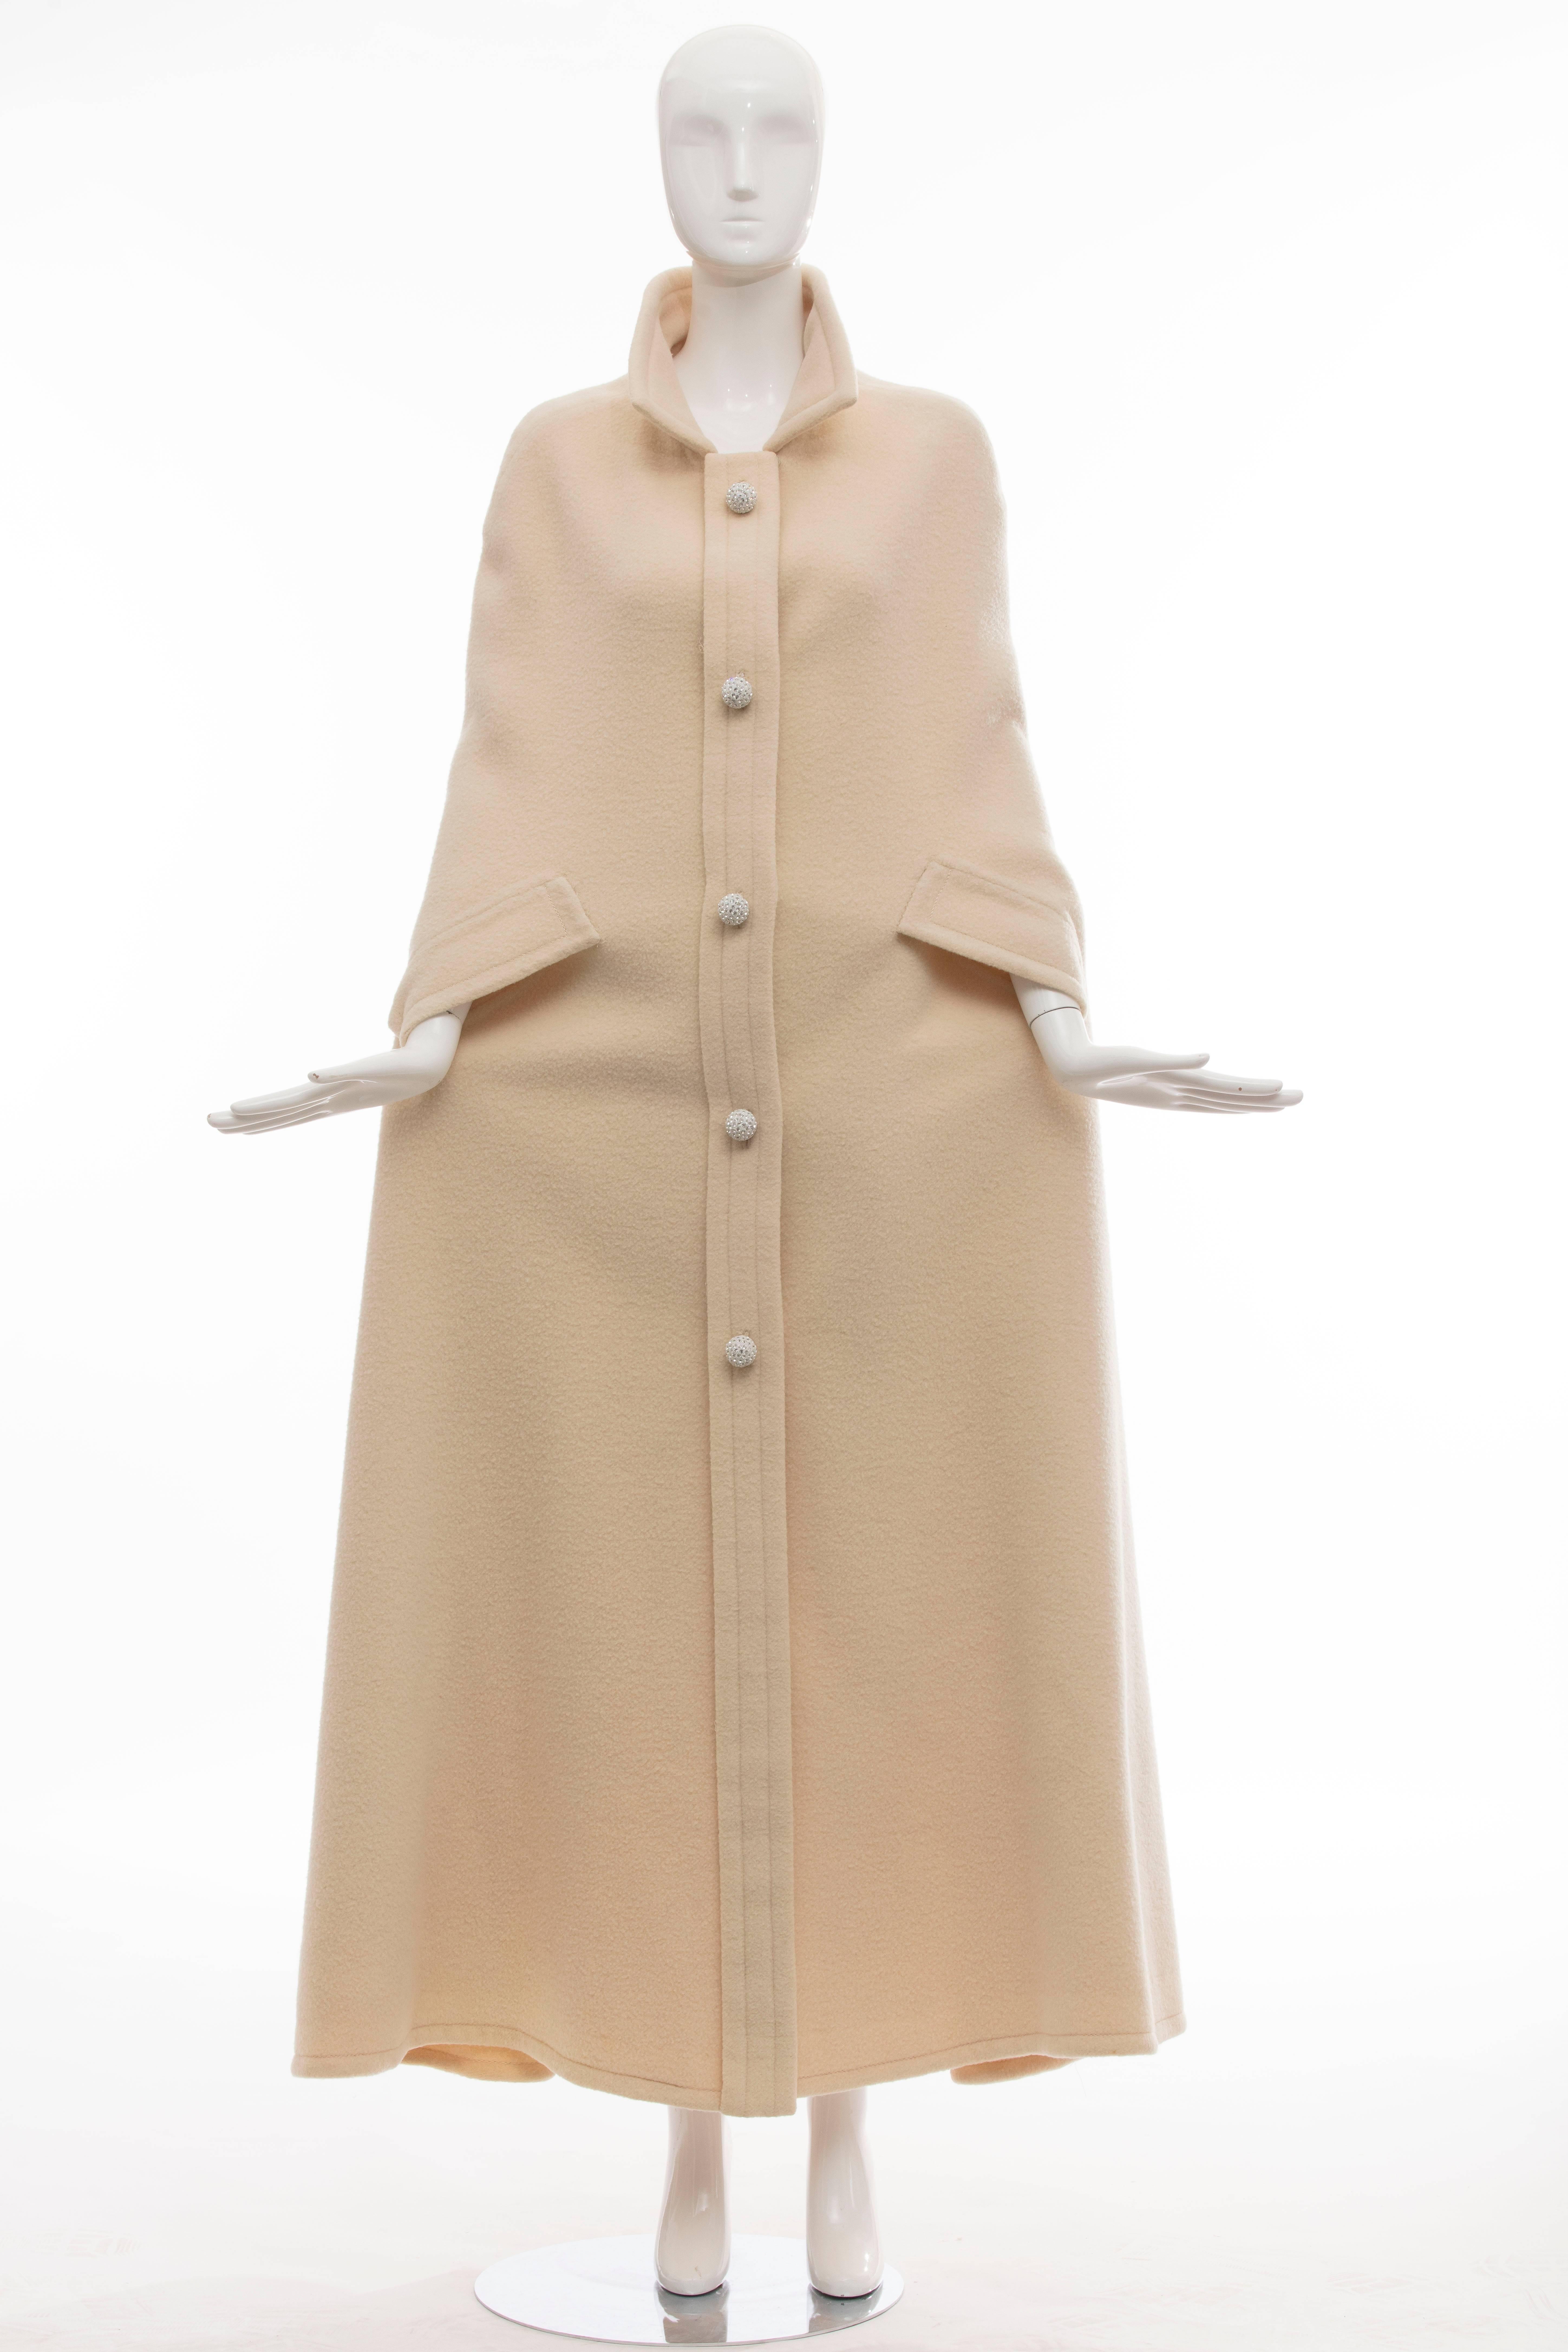 Christian Dior Haute Couture by Marc Bohan Autumn-Winter 1966 cream wool cape with pointed collar, dual slits at sides and diamante embellished contrast snap closure at center front.

No Size Label

Length 57